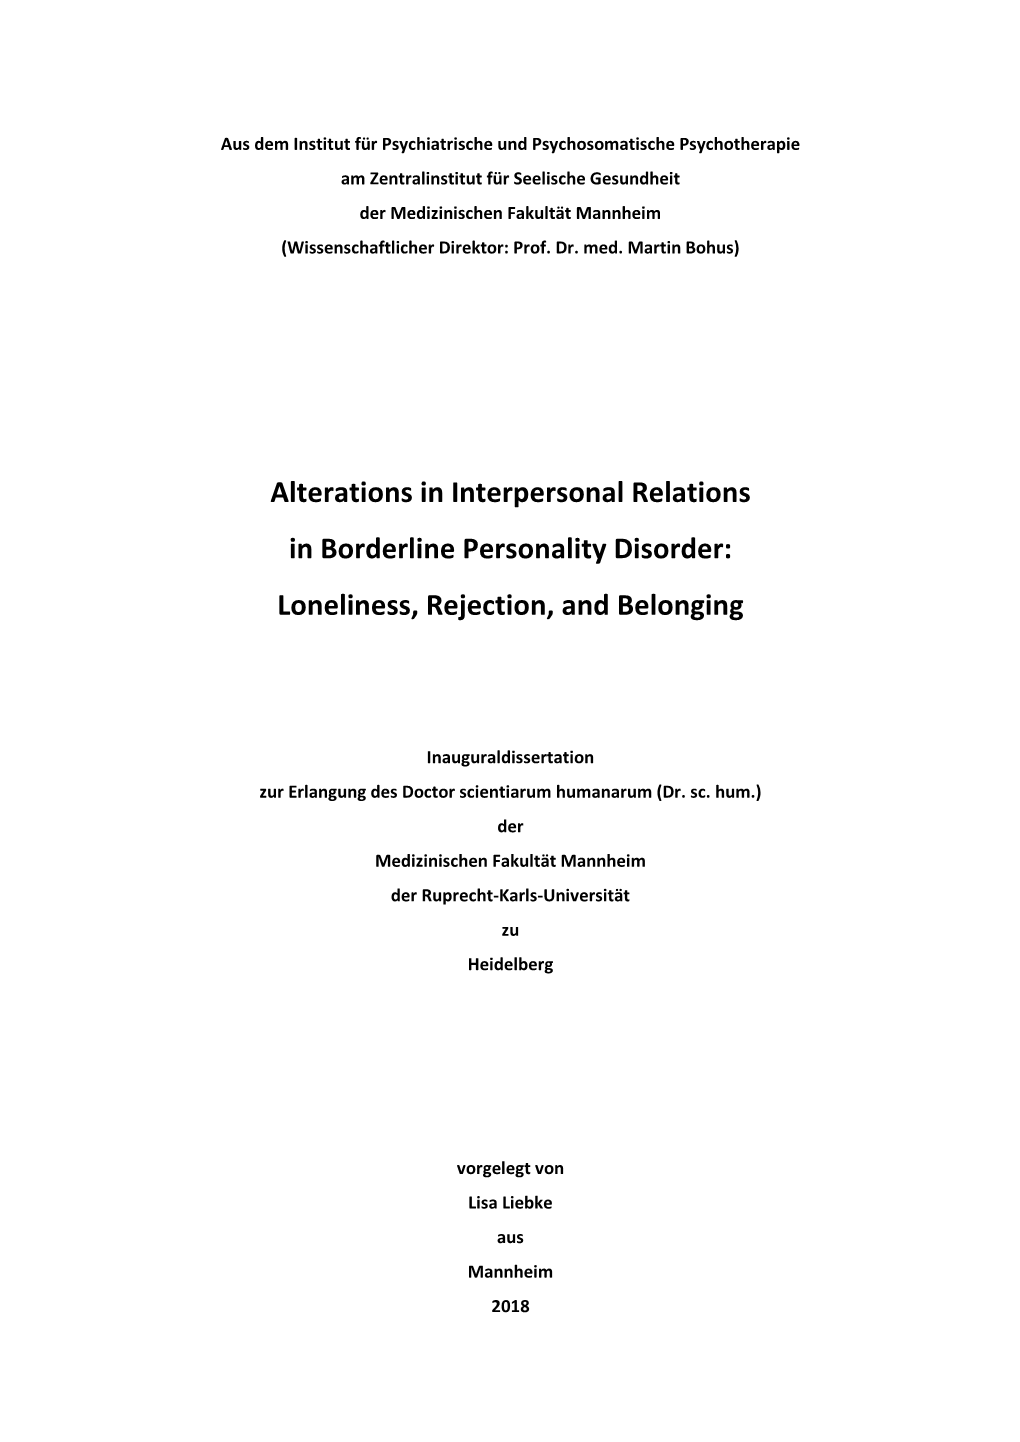 Alterations in Interpersonal Relations in Borderline Personality Disorder: Loneliness, Rejection, and Belonging